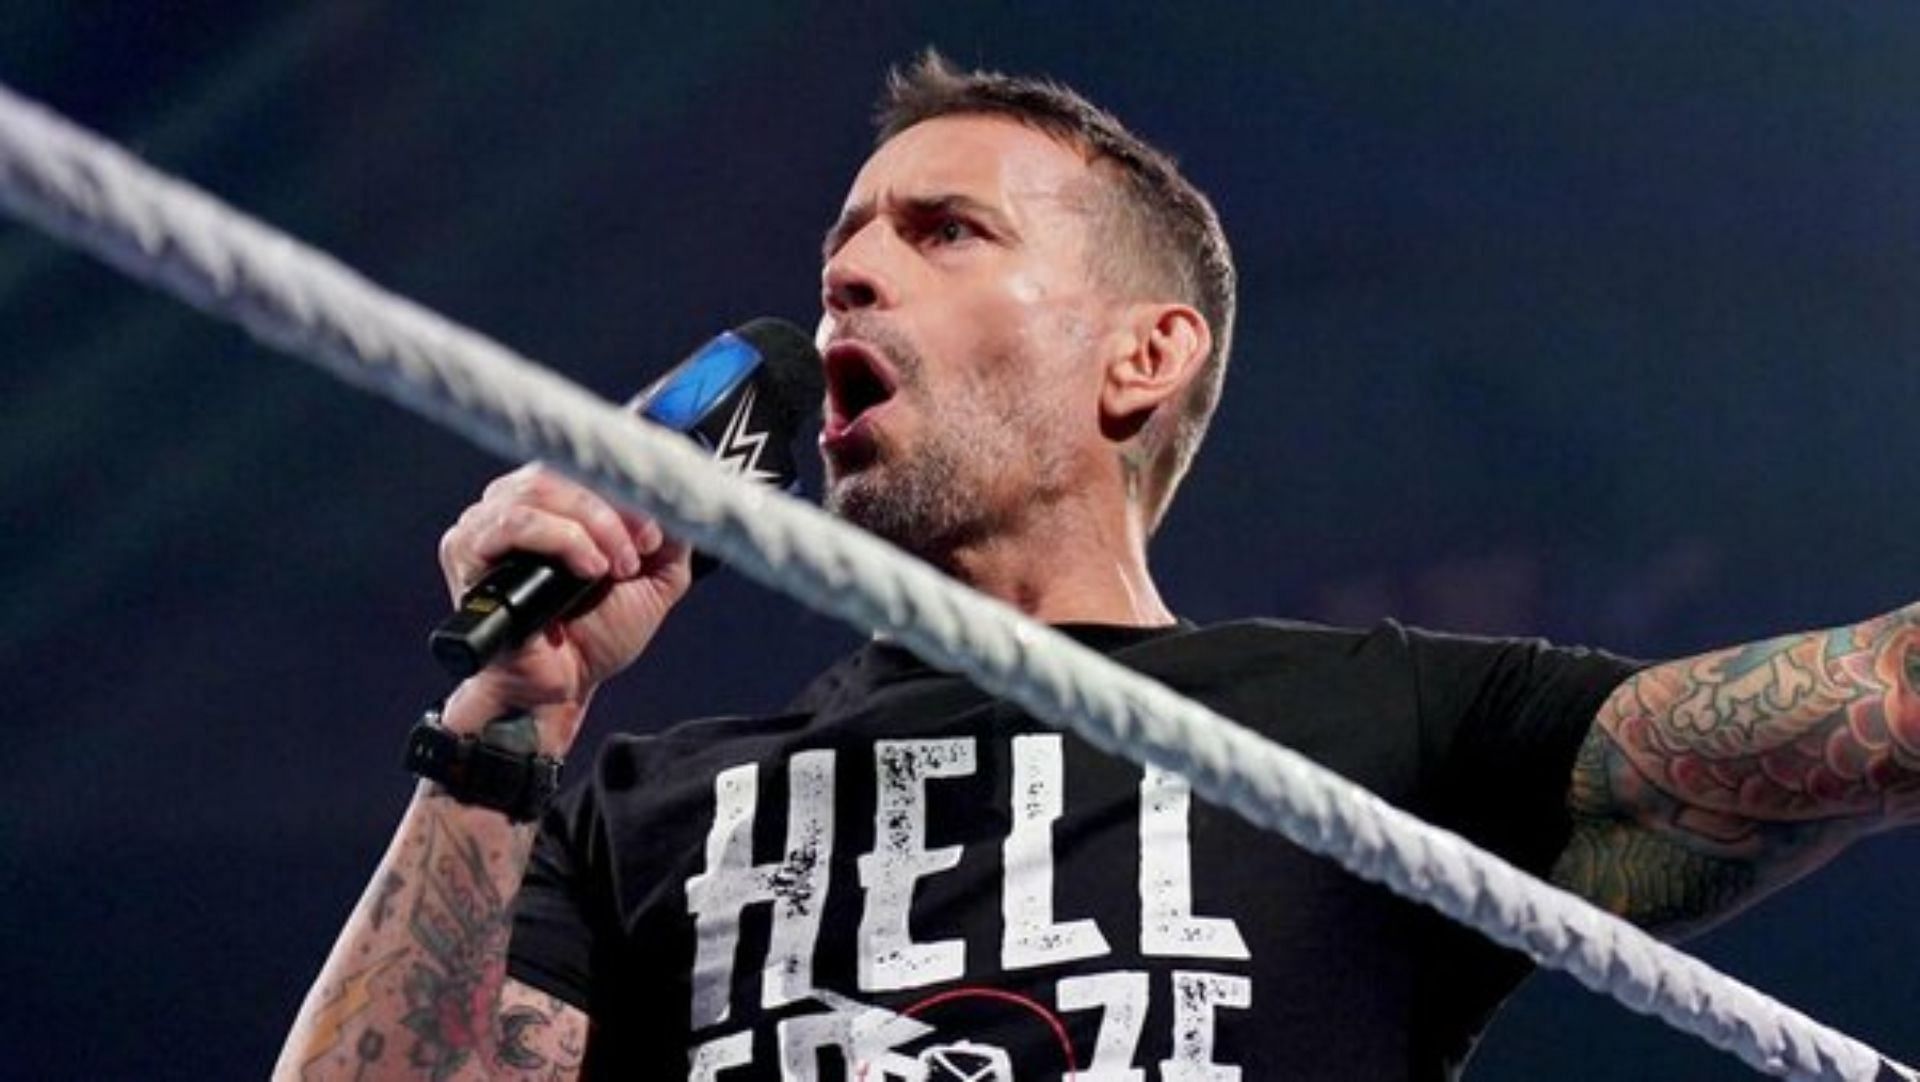 What have you made of CM Punk